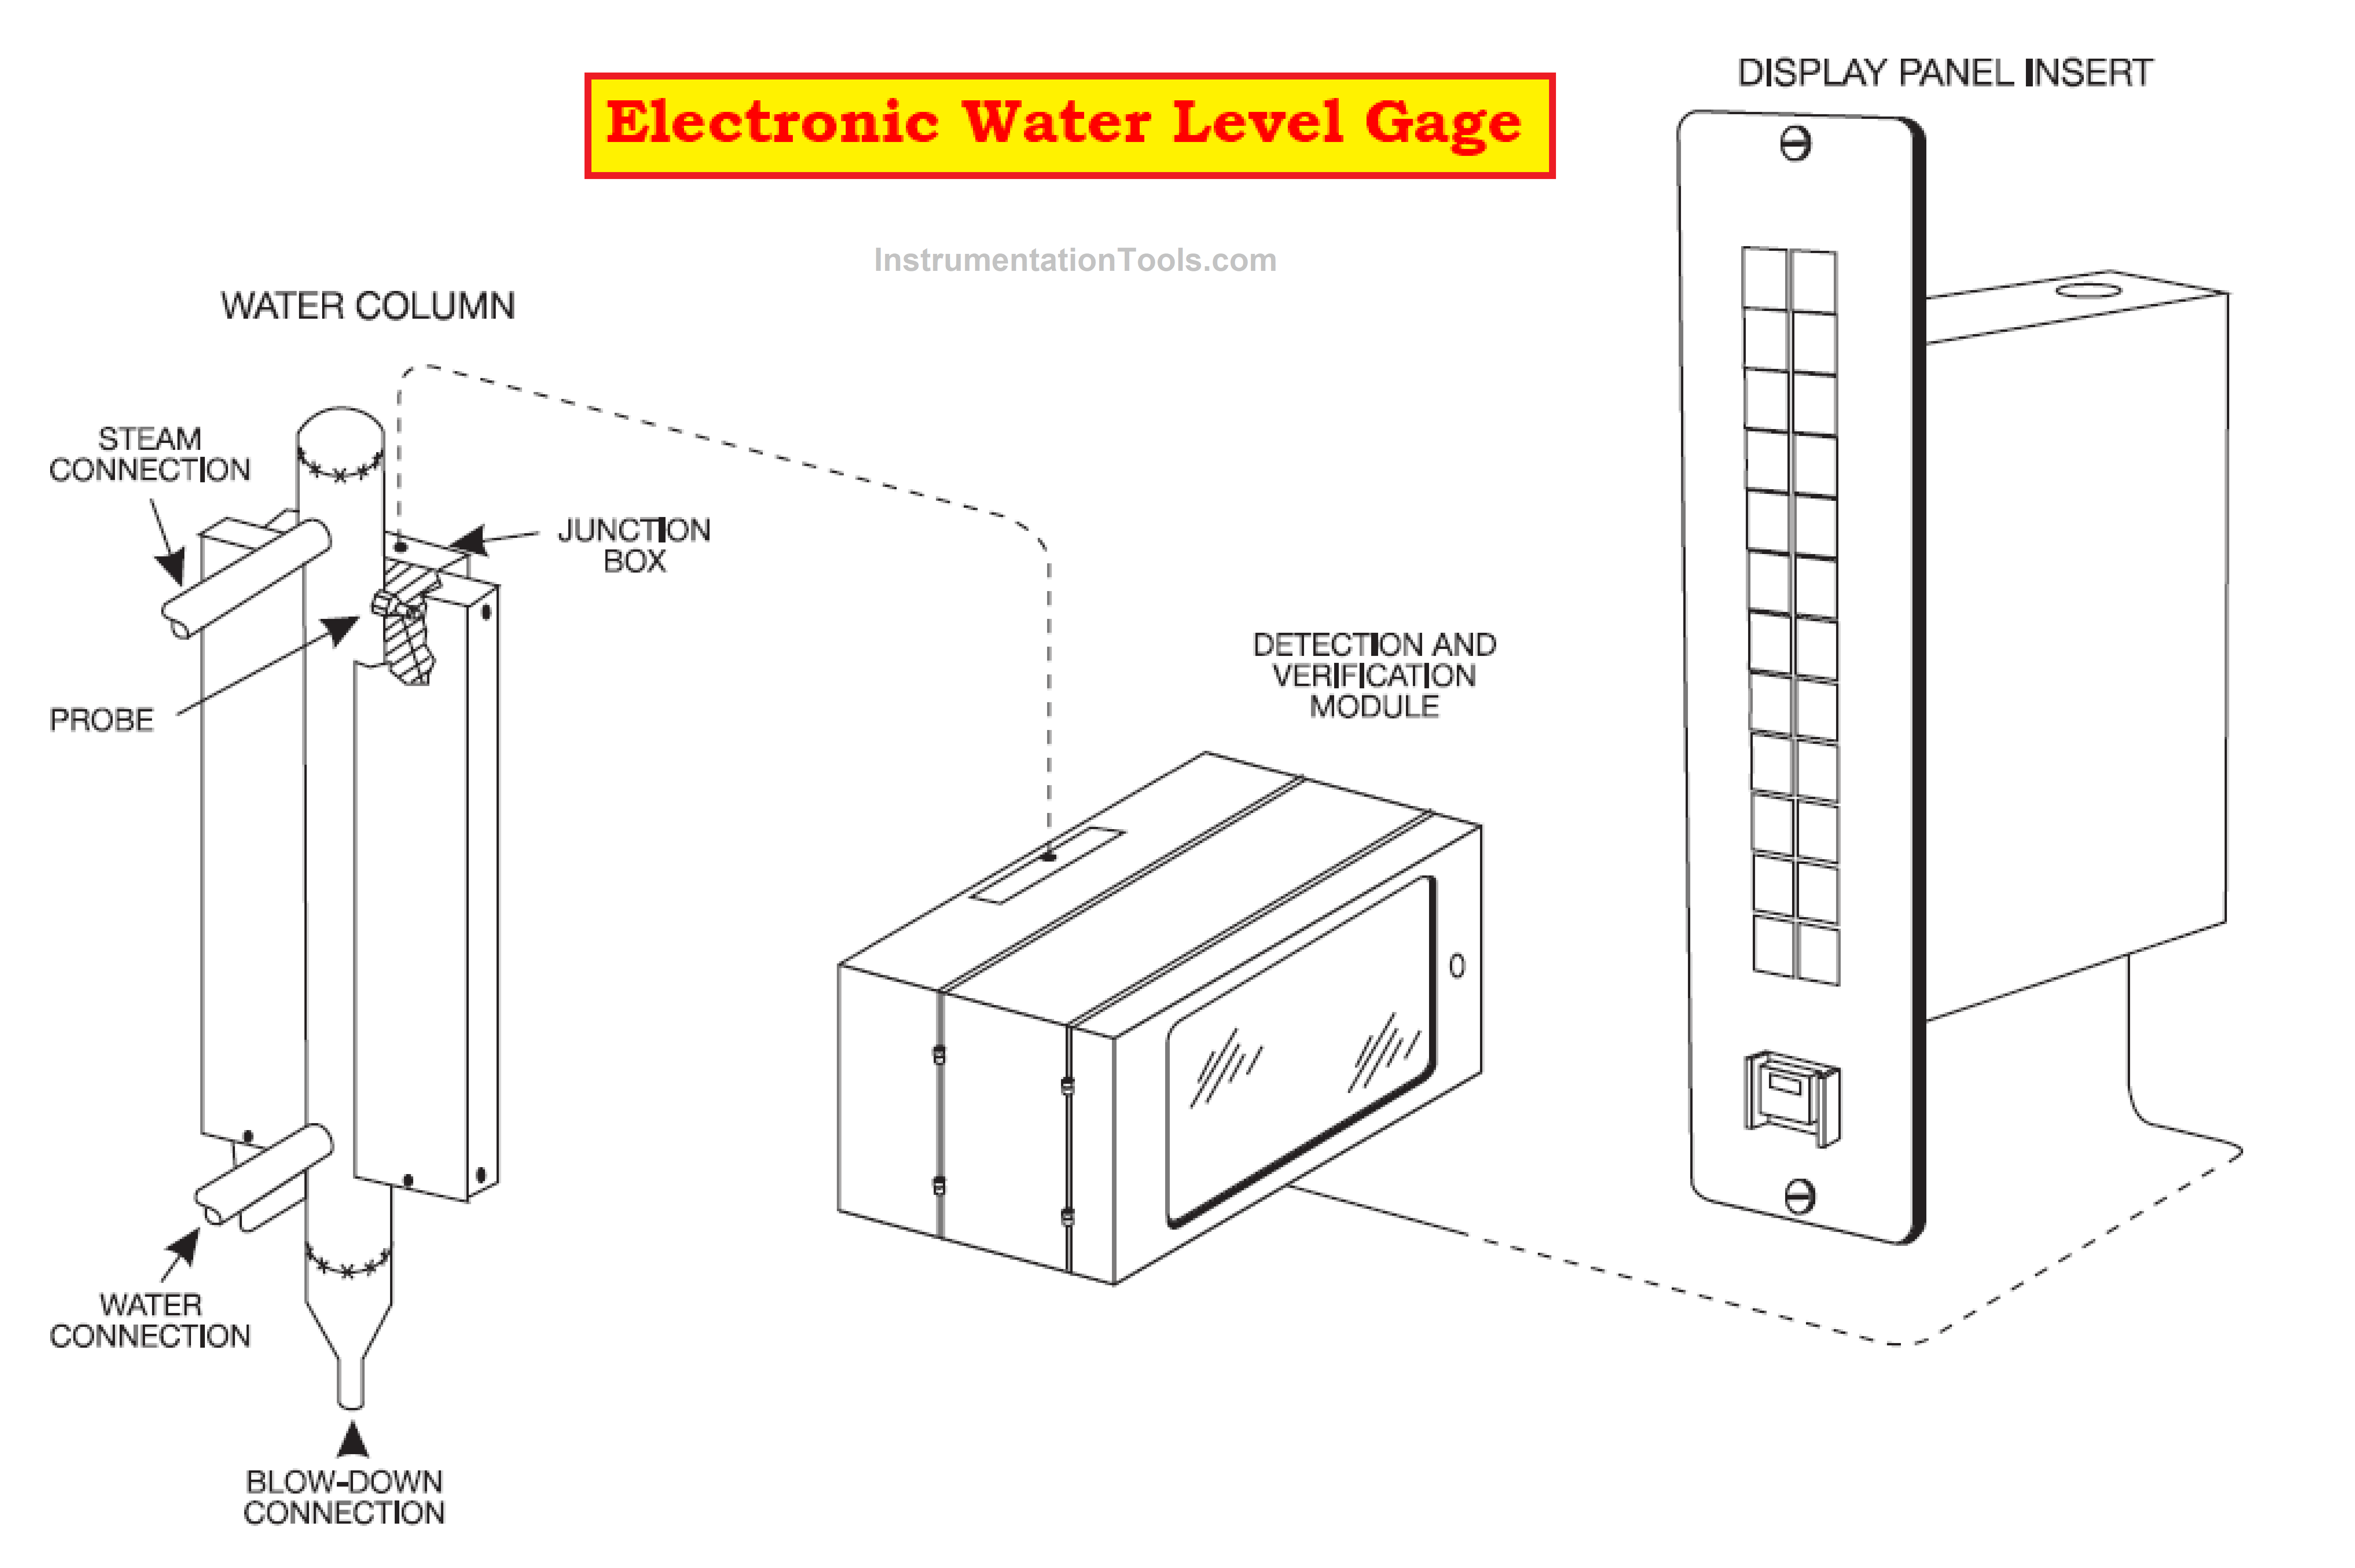 Electronic Water Level Gage